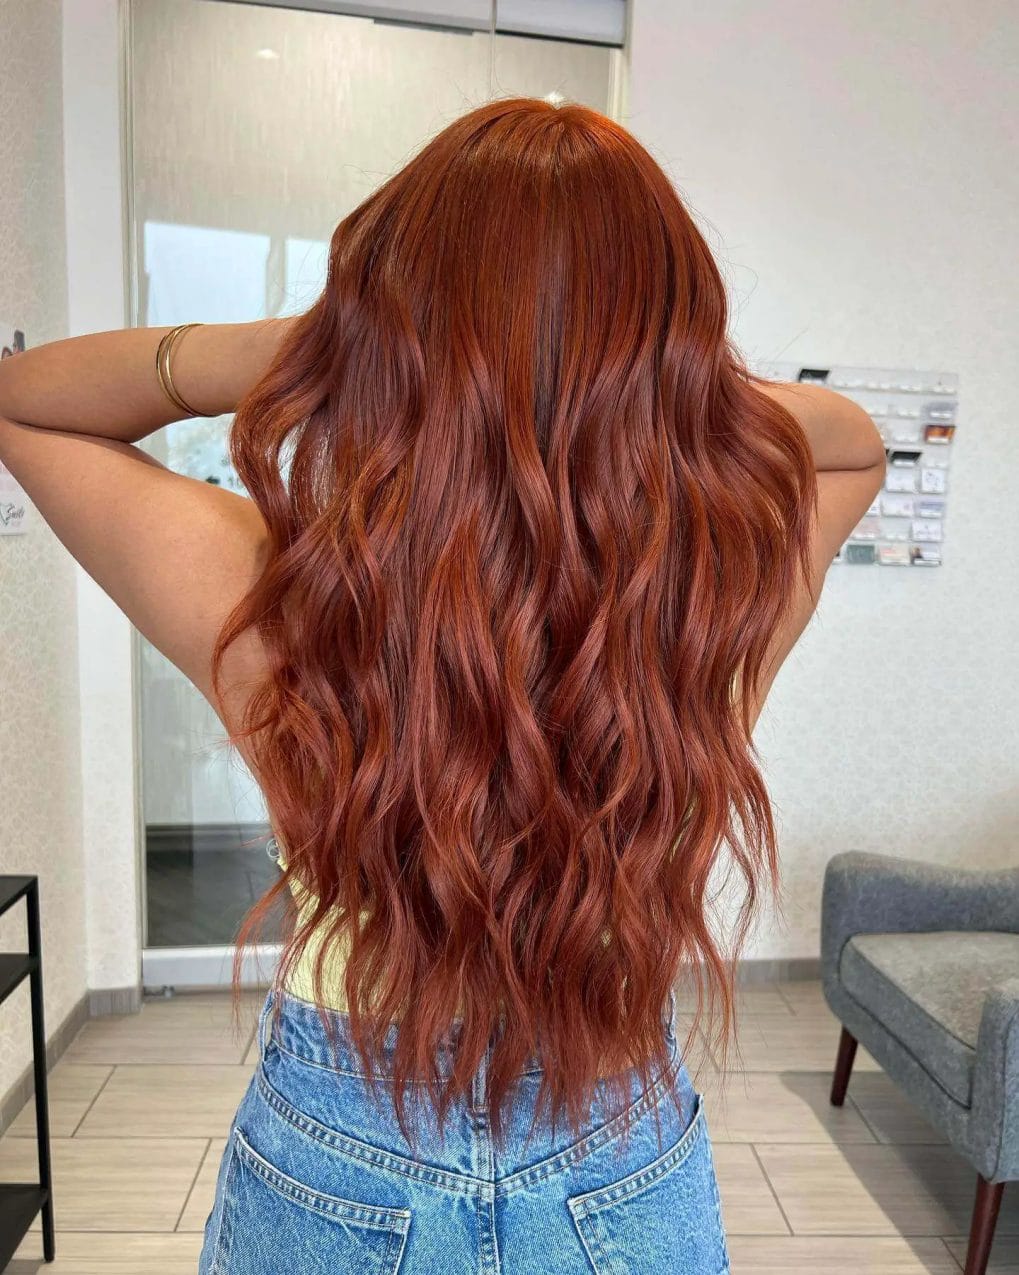 Vivid copper hair with highlights, long waves, and voluminous layers.